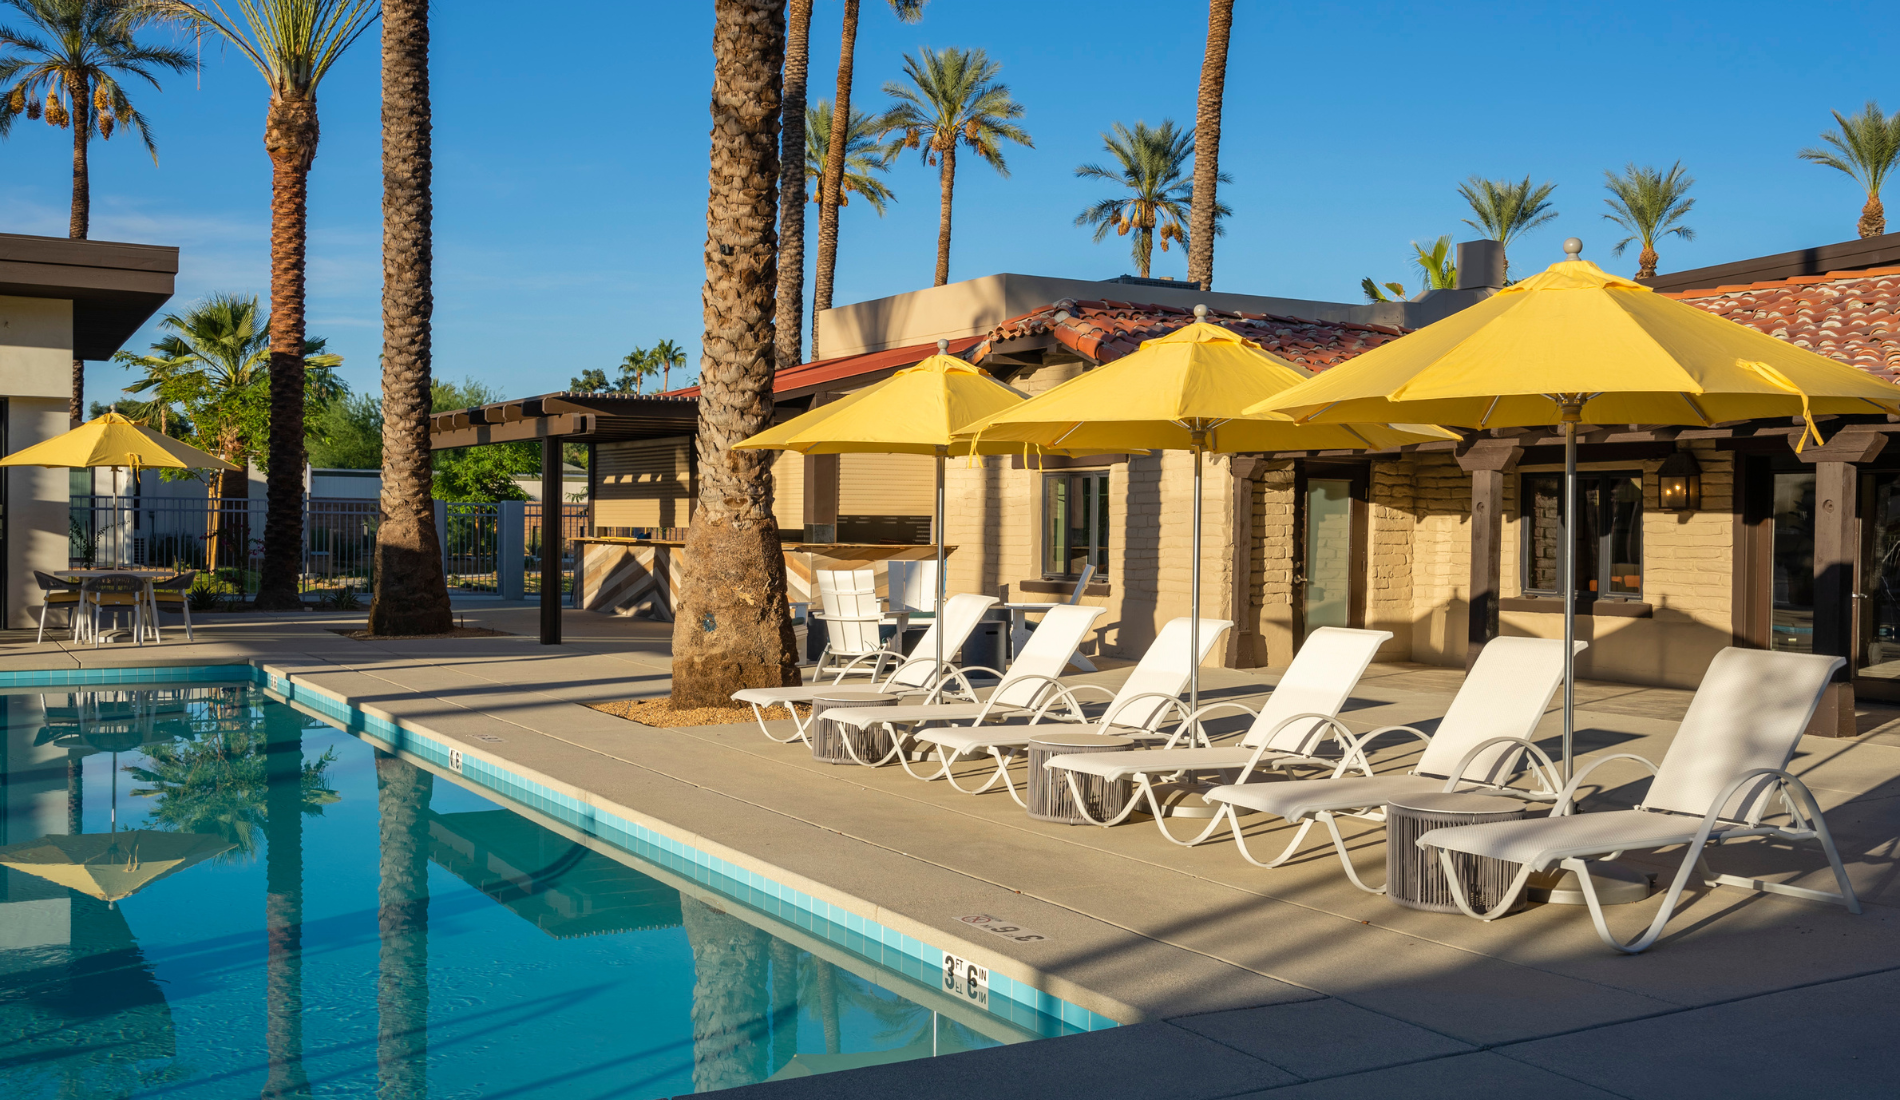 Palm Springs luxury resort pool with lounge chairs, umbrellas